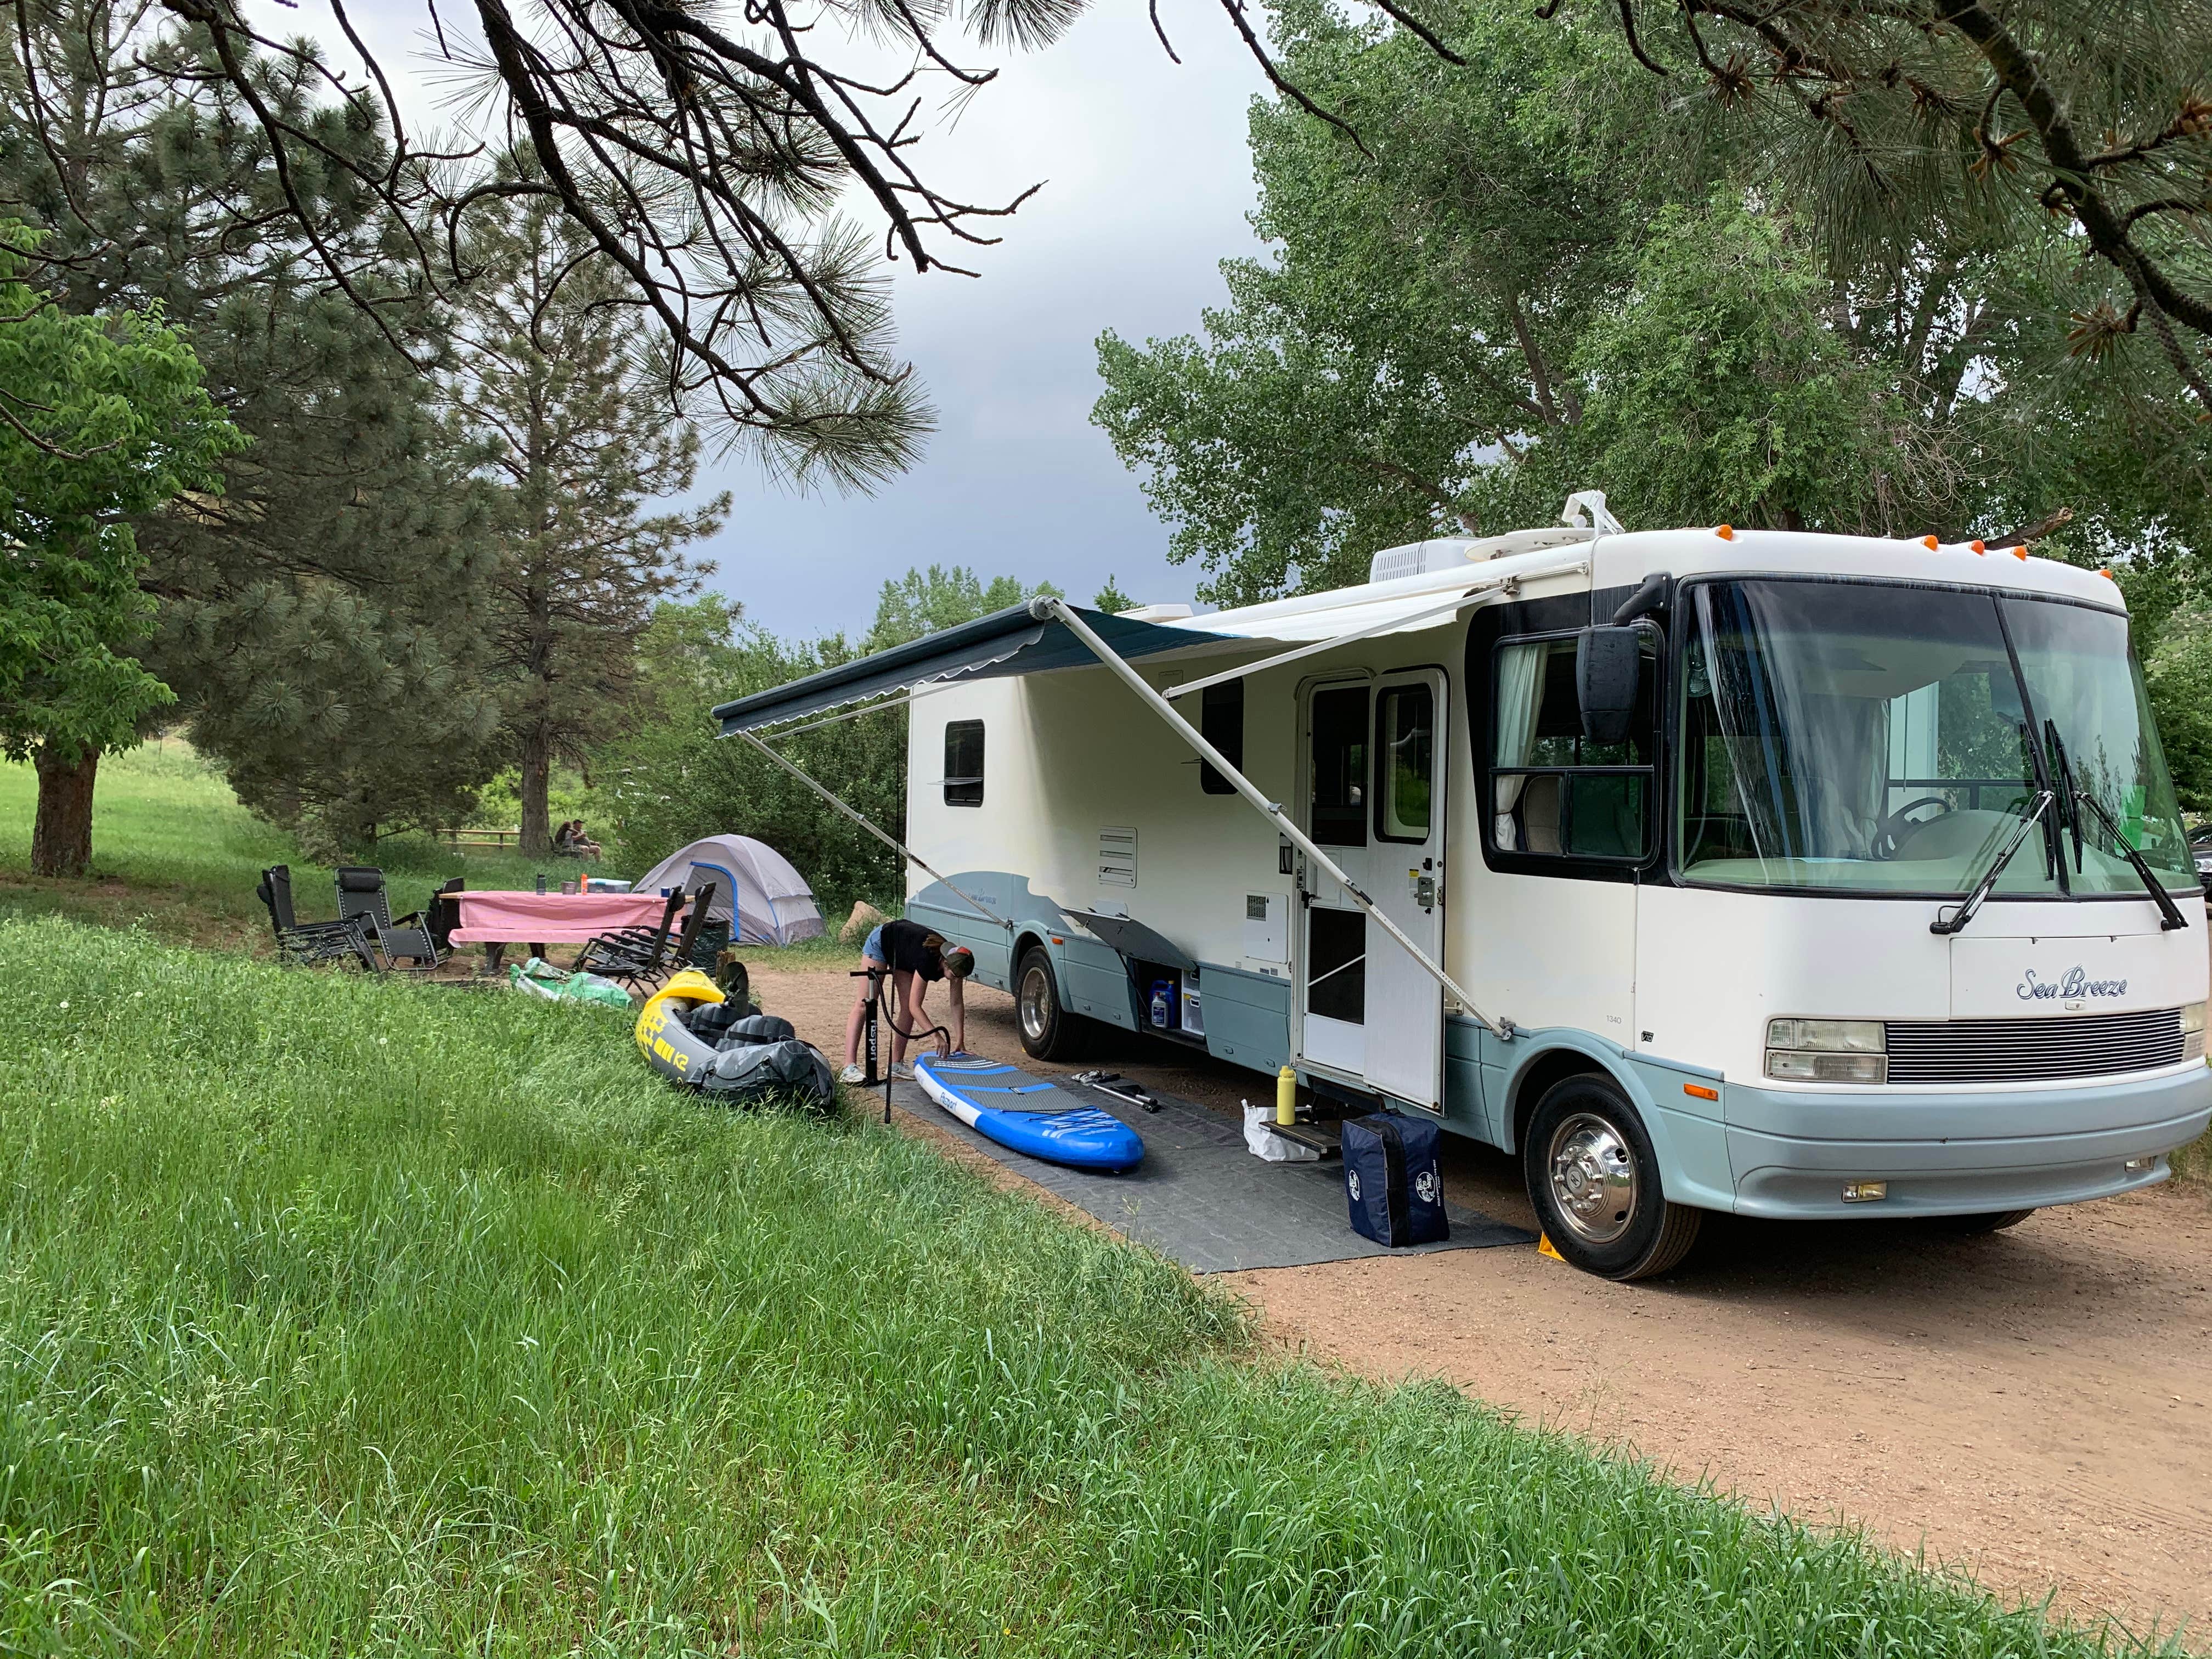 Camper submitted image from Horsetooth Reservoir County Park South Bay - 4